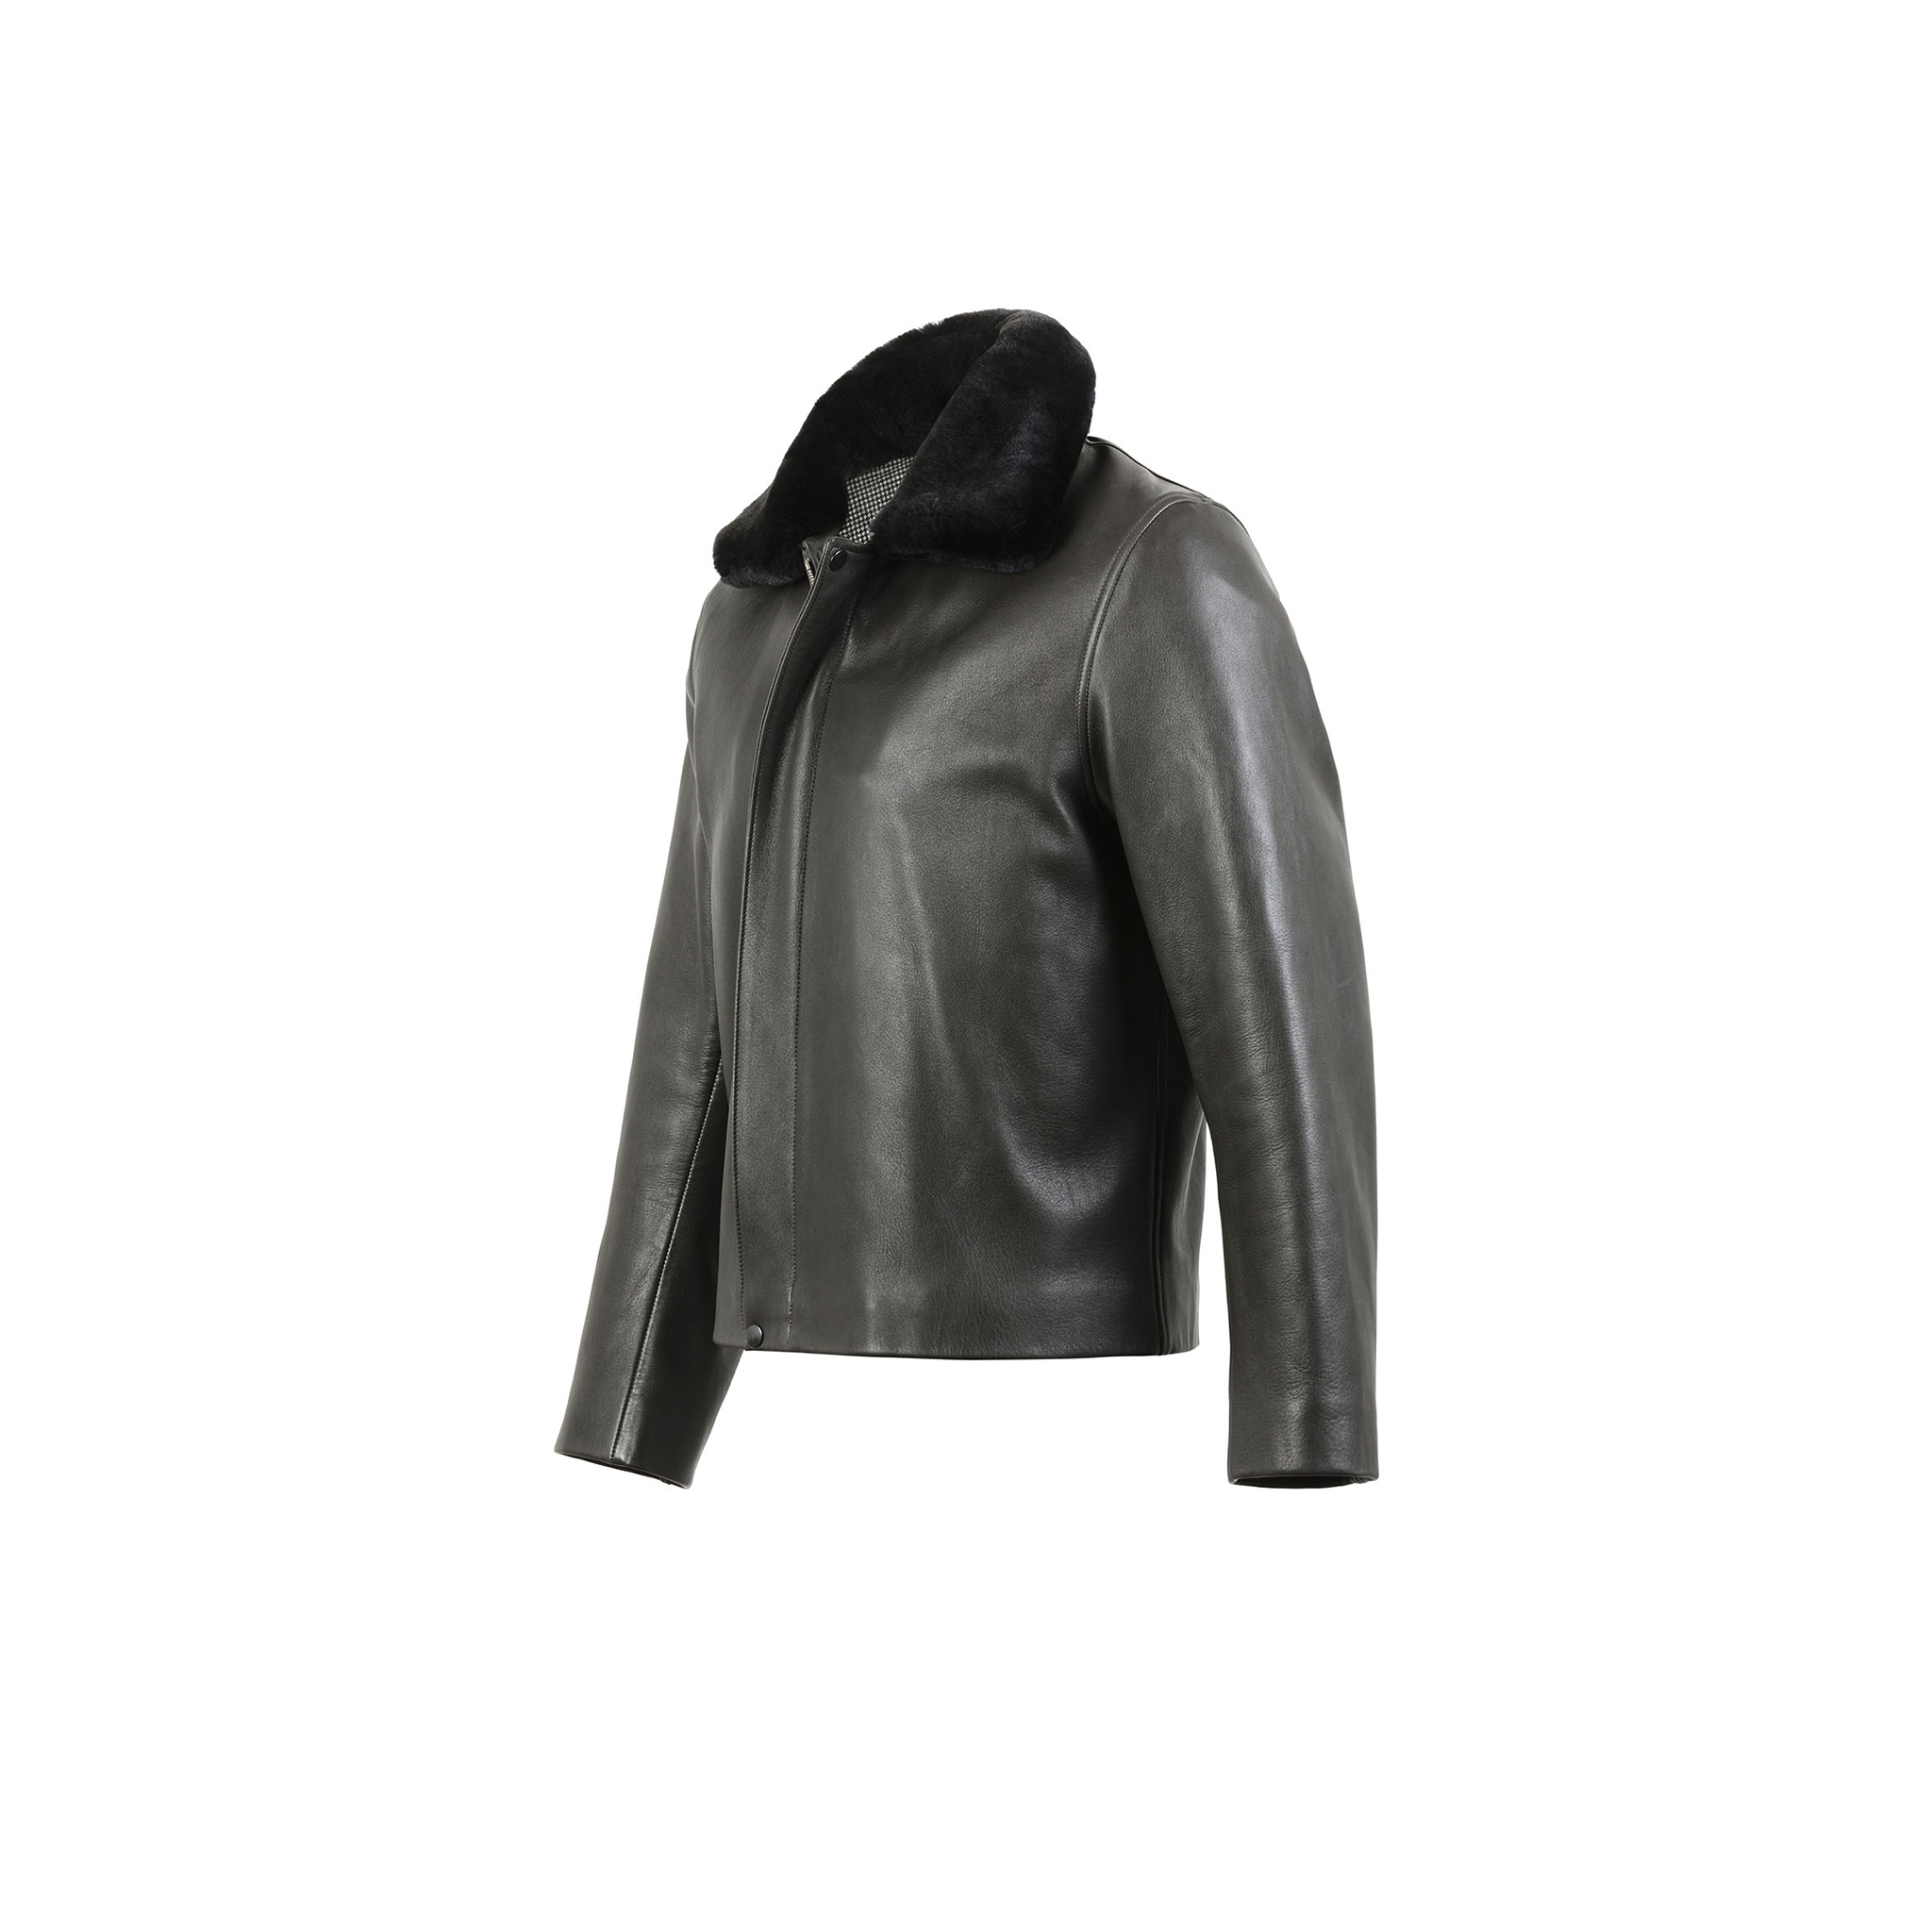 Bomber Jacket - Fox Brothers flannel lining - Glossy leather - Anthracite color